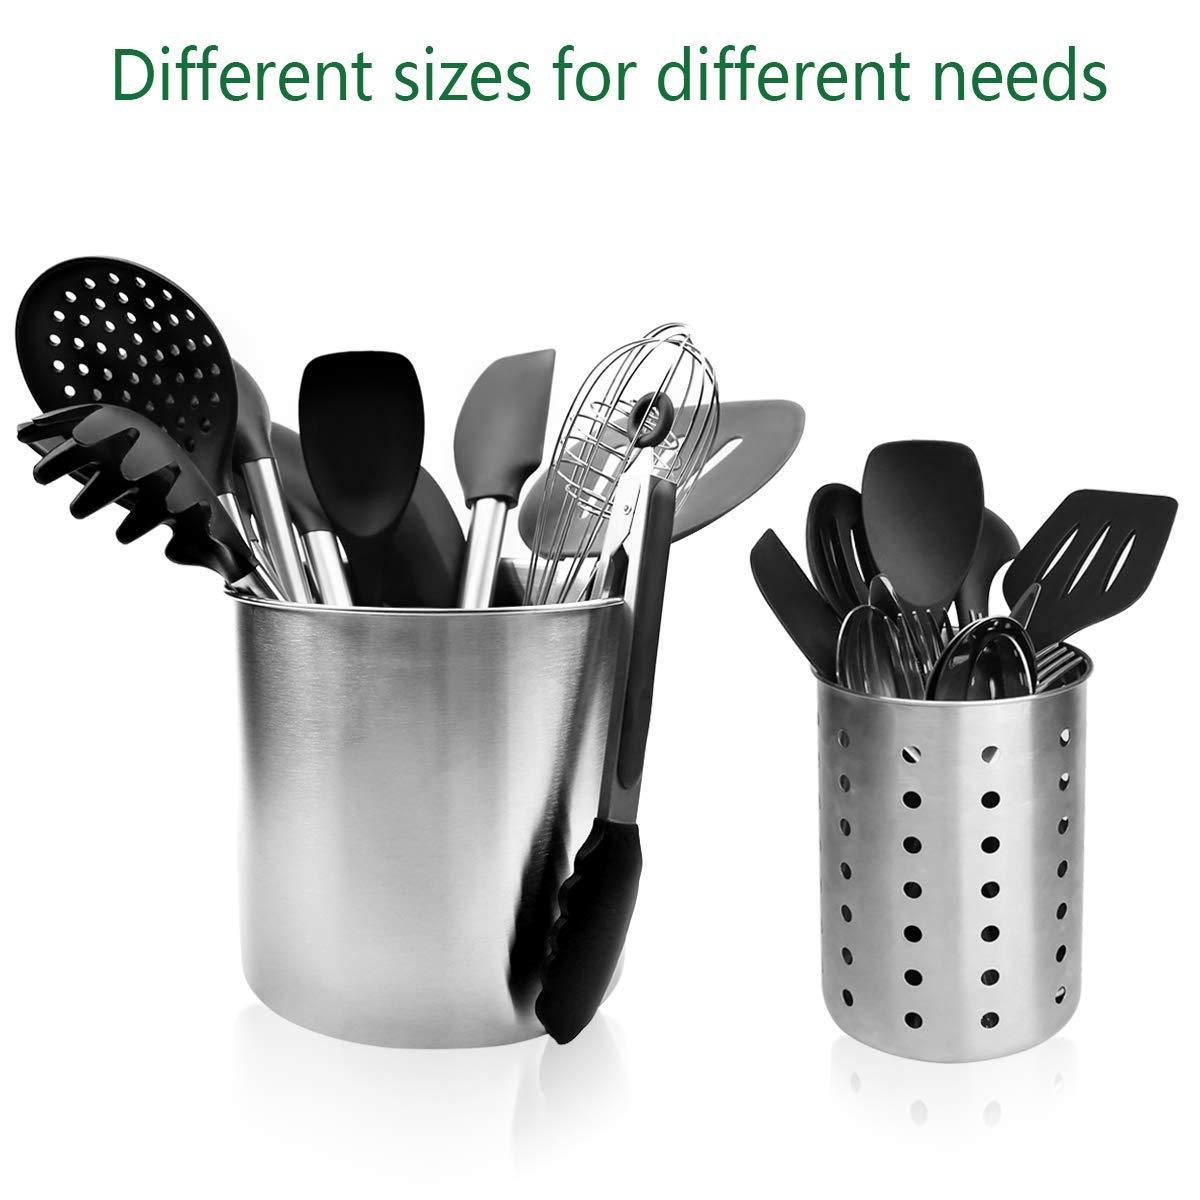 Discover the utensil holder stainless steel kitchen cooking utensil holder for organizing and storage dishwasher safe silver 2 pack